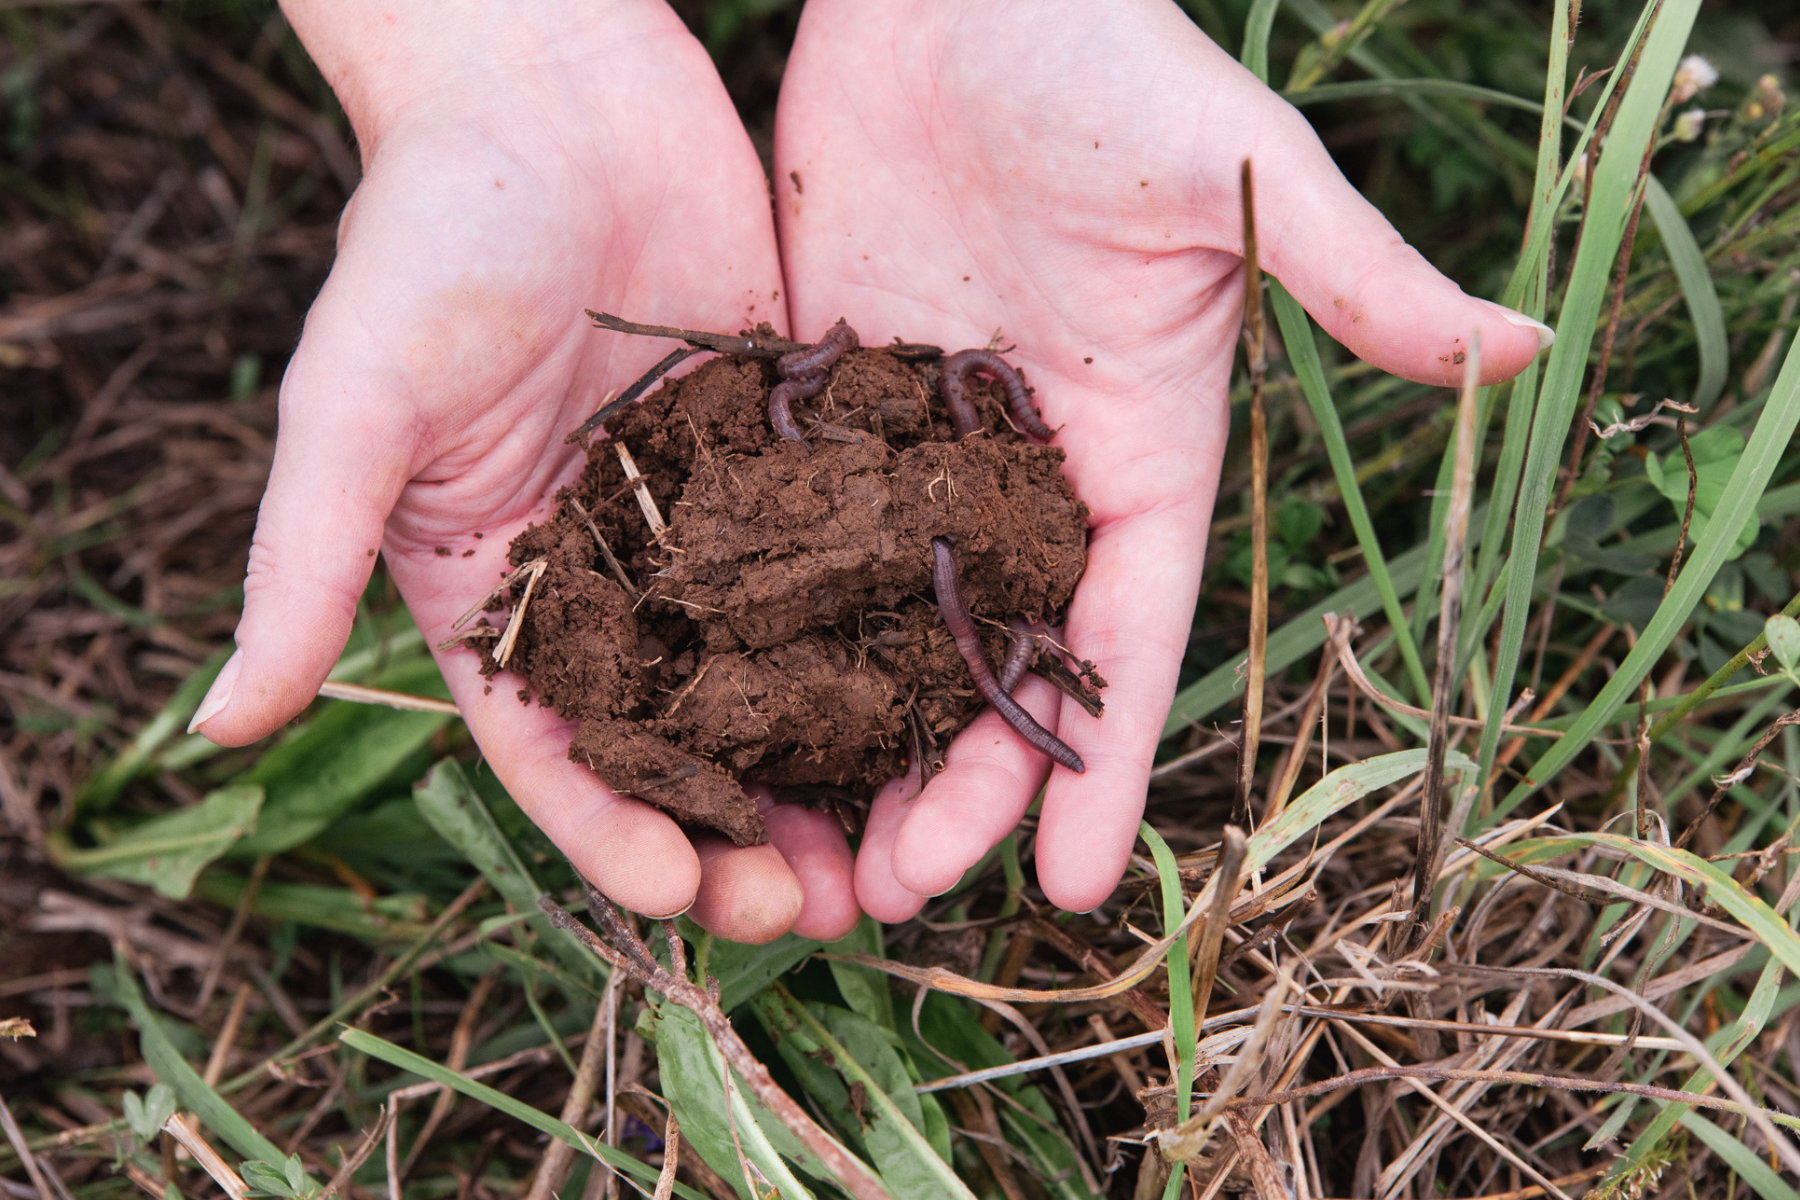 Hands holing soil with worms